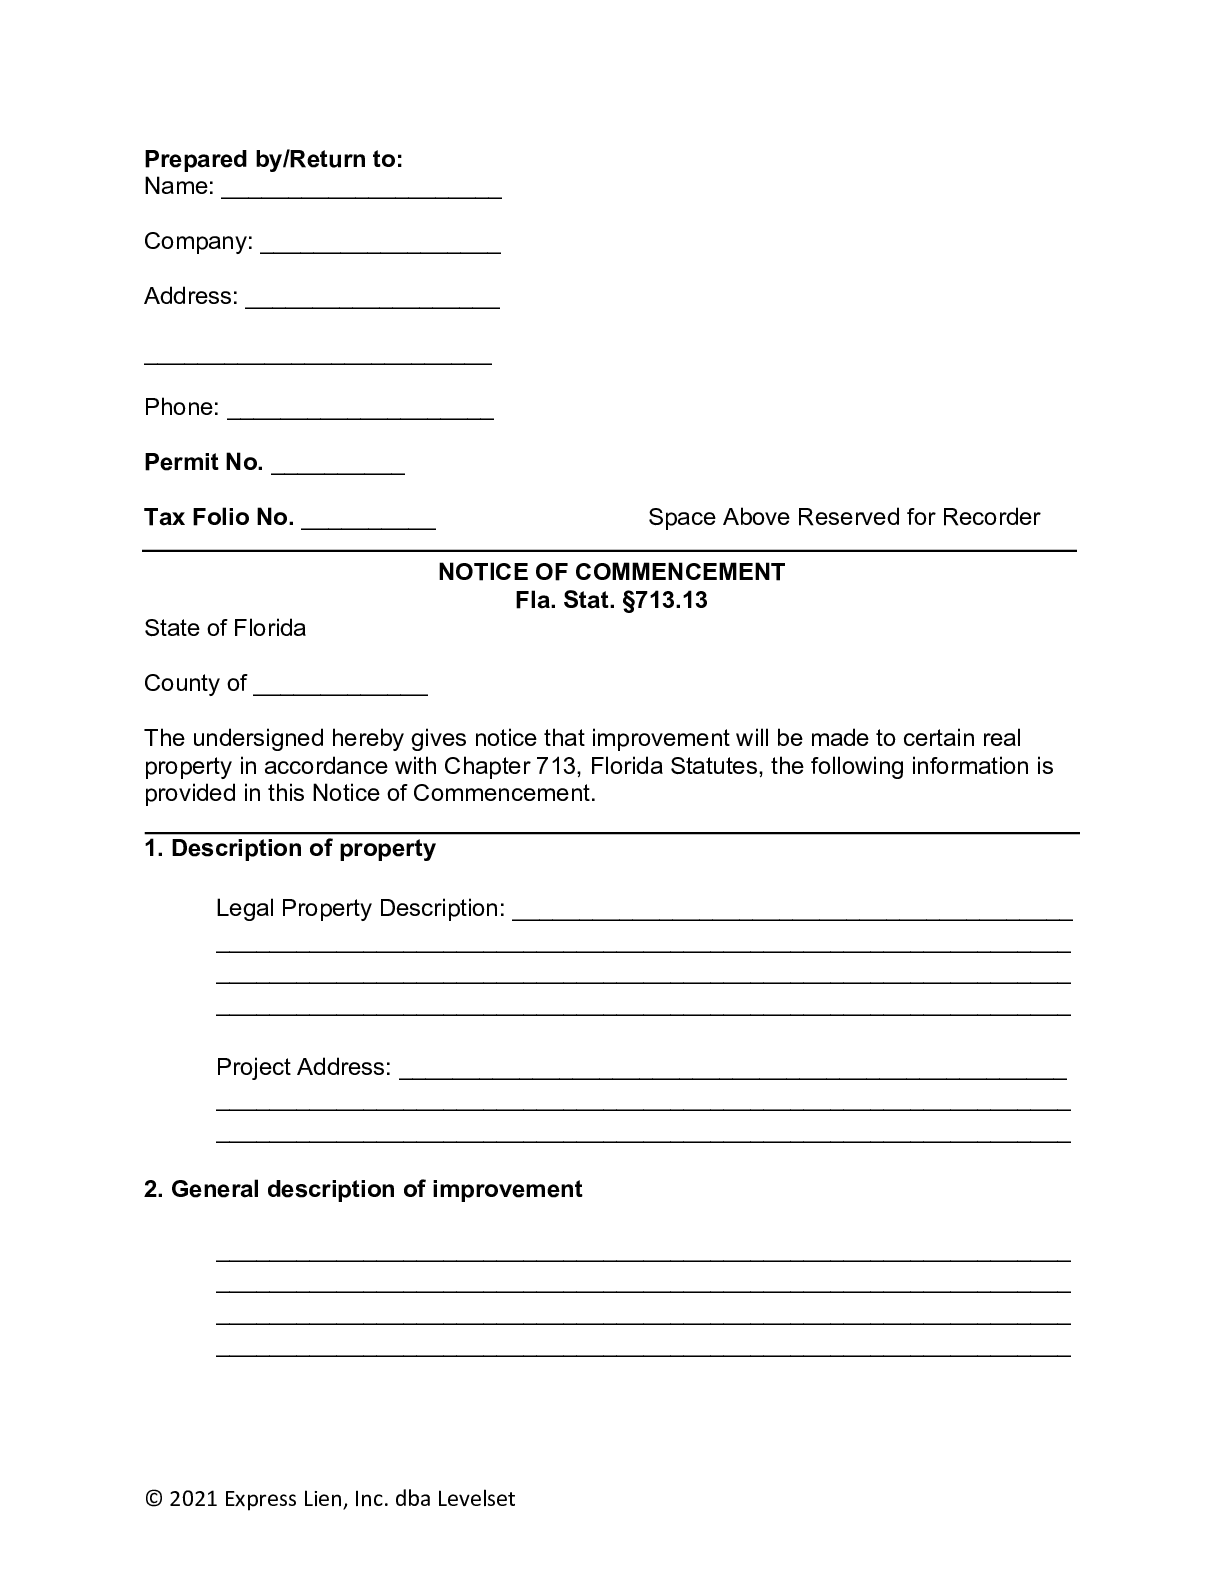 Florida Notice of Commencement Form - free from